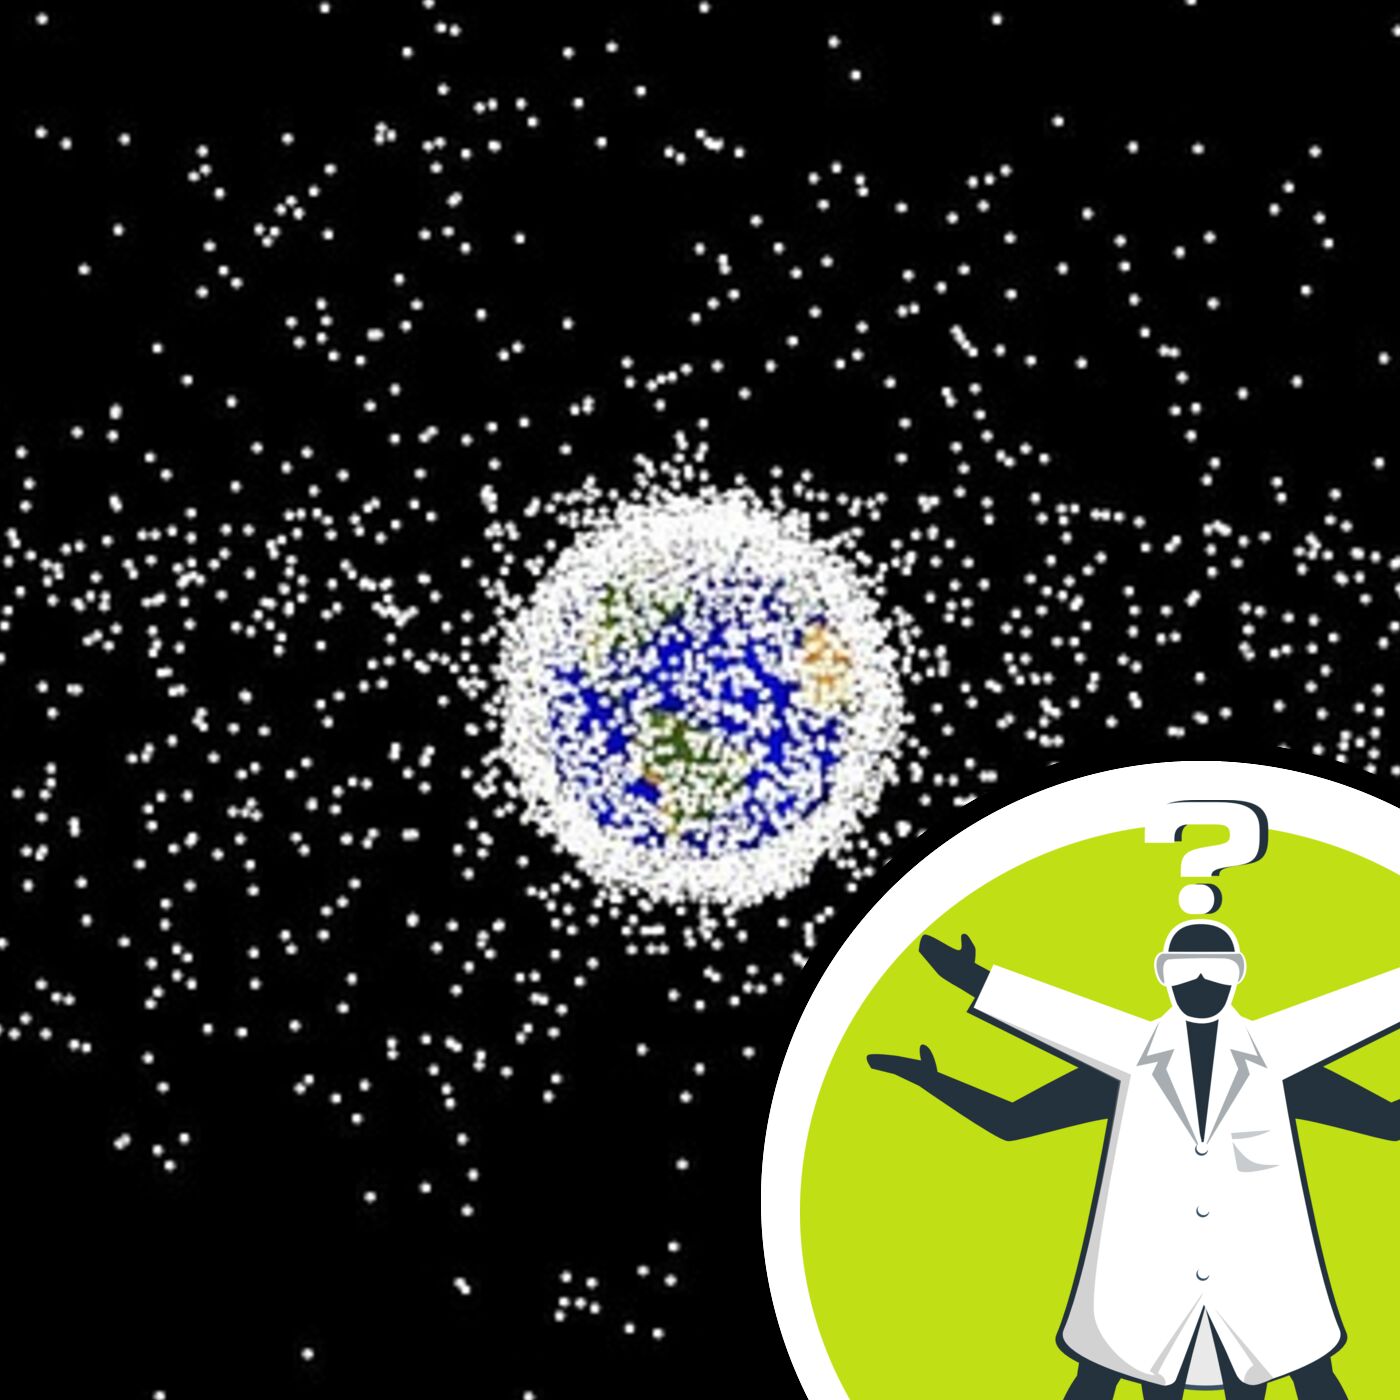 Could we turn space junk into a moonbase?